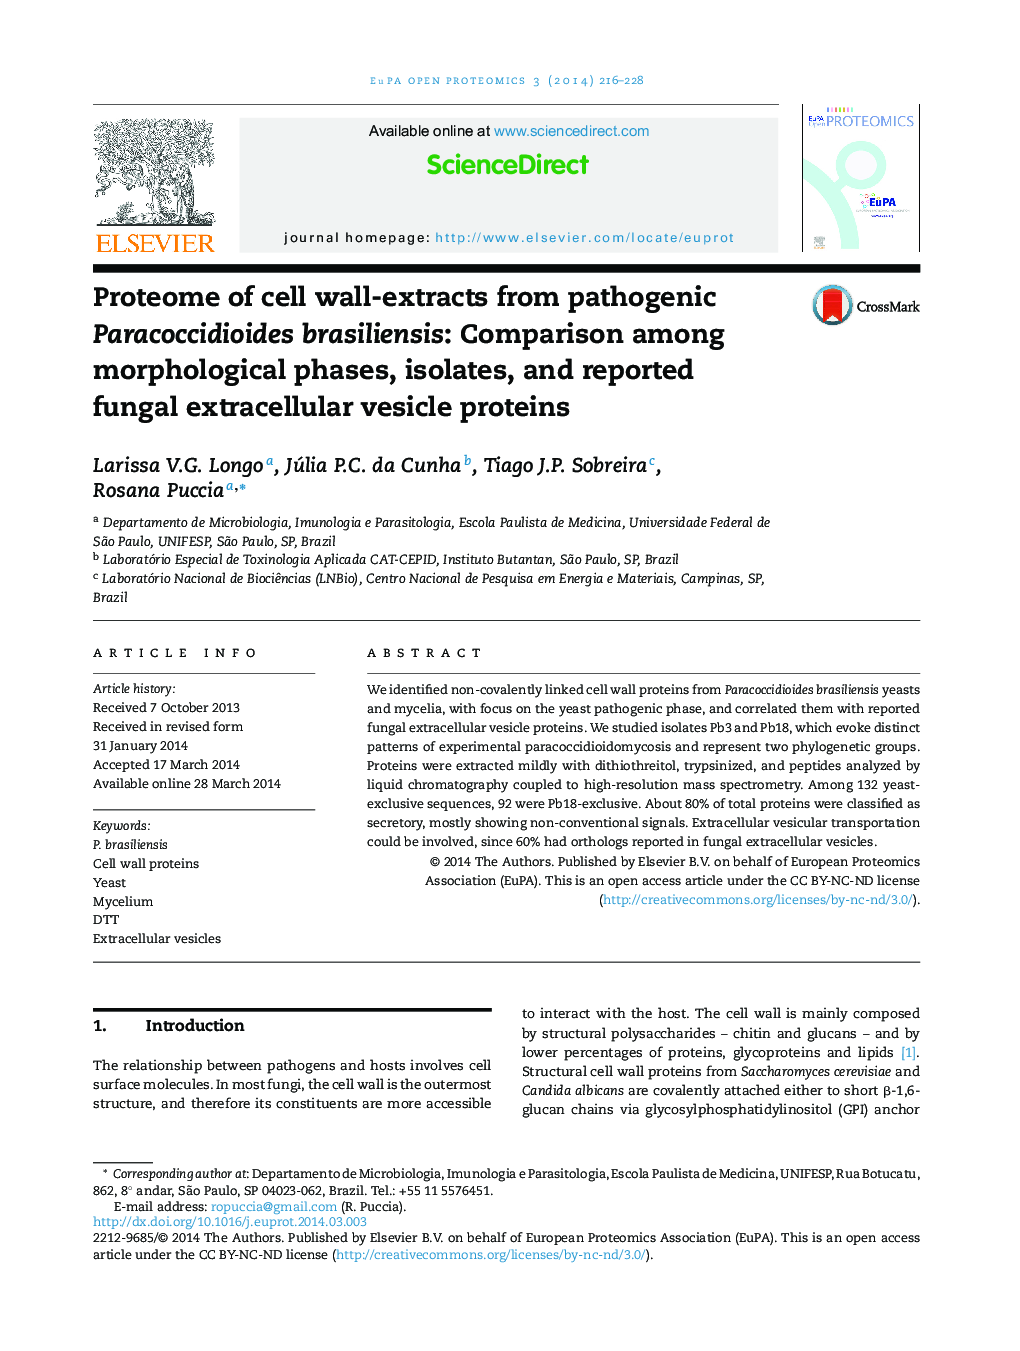 Proteome of cell wall-extracts from pathogenic Paracoccidioides brasiliensis: Comparison among morphological phases, isolates, and reported fungal extracellular vesicle proteins 